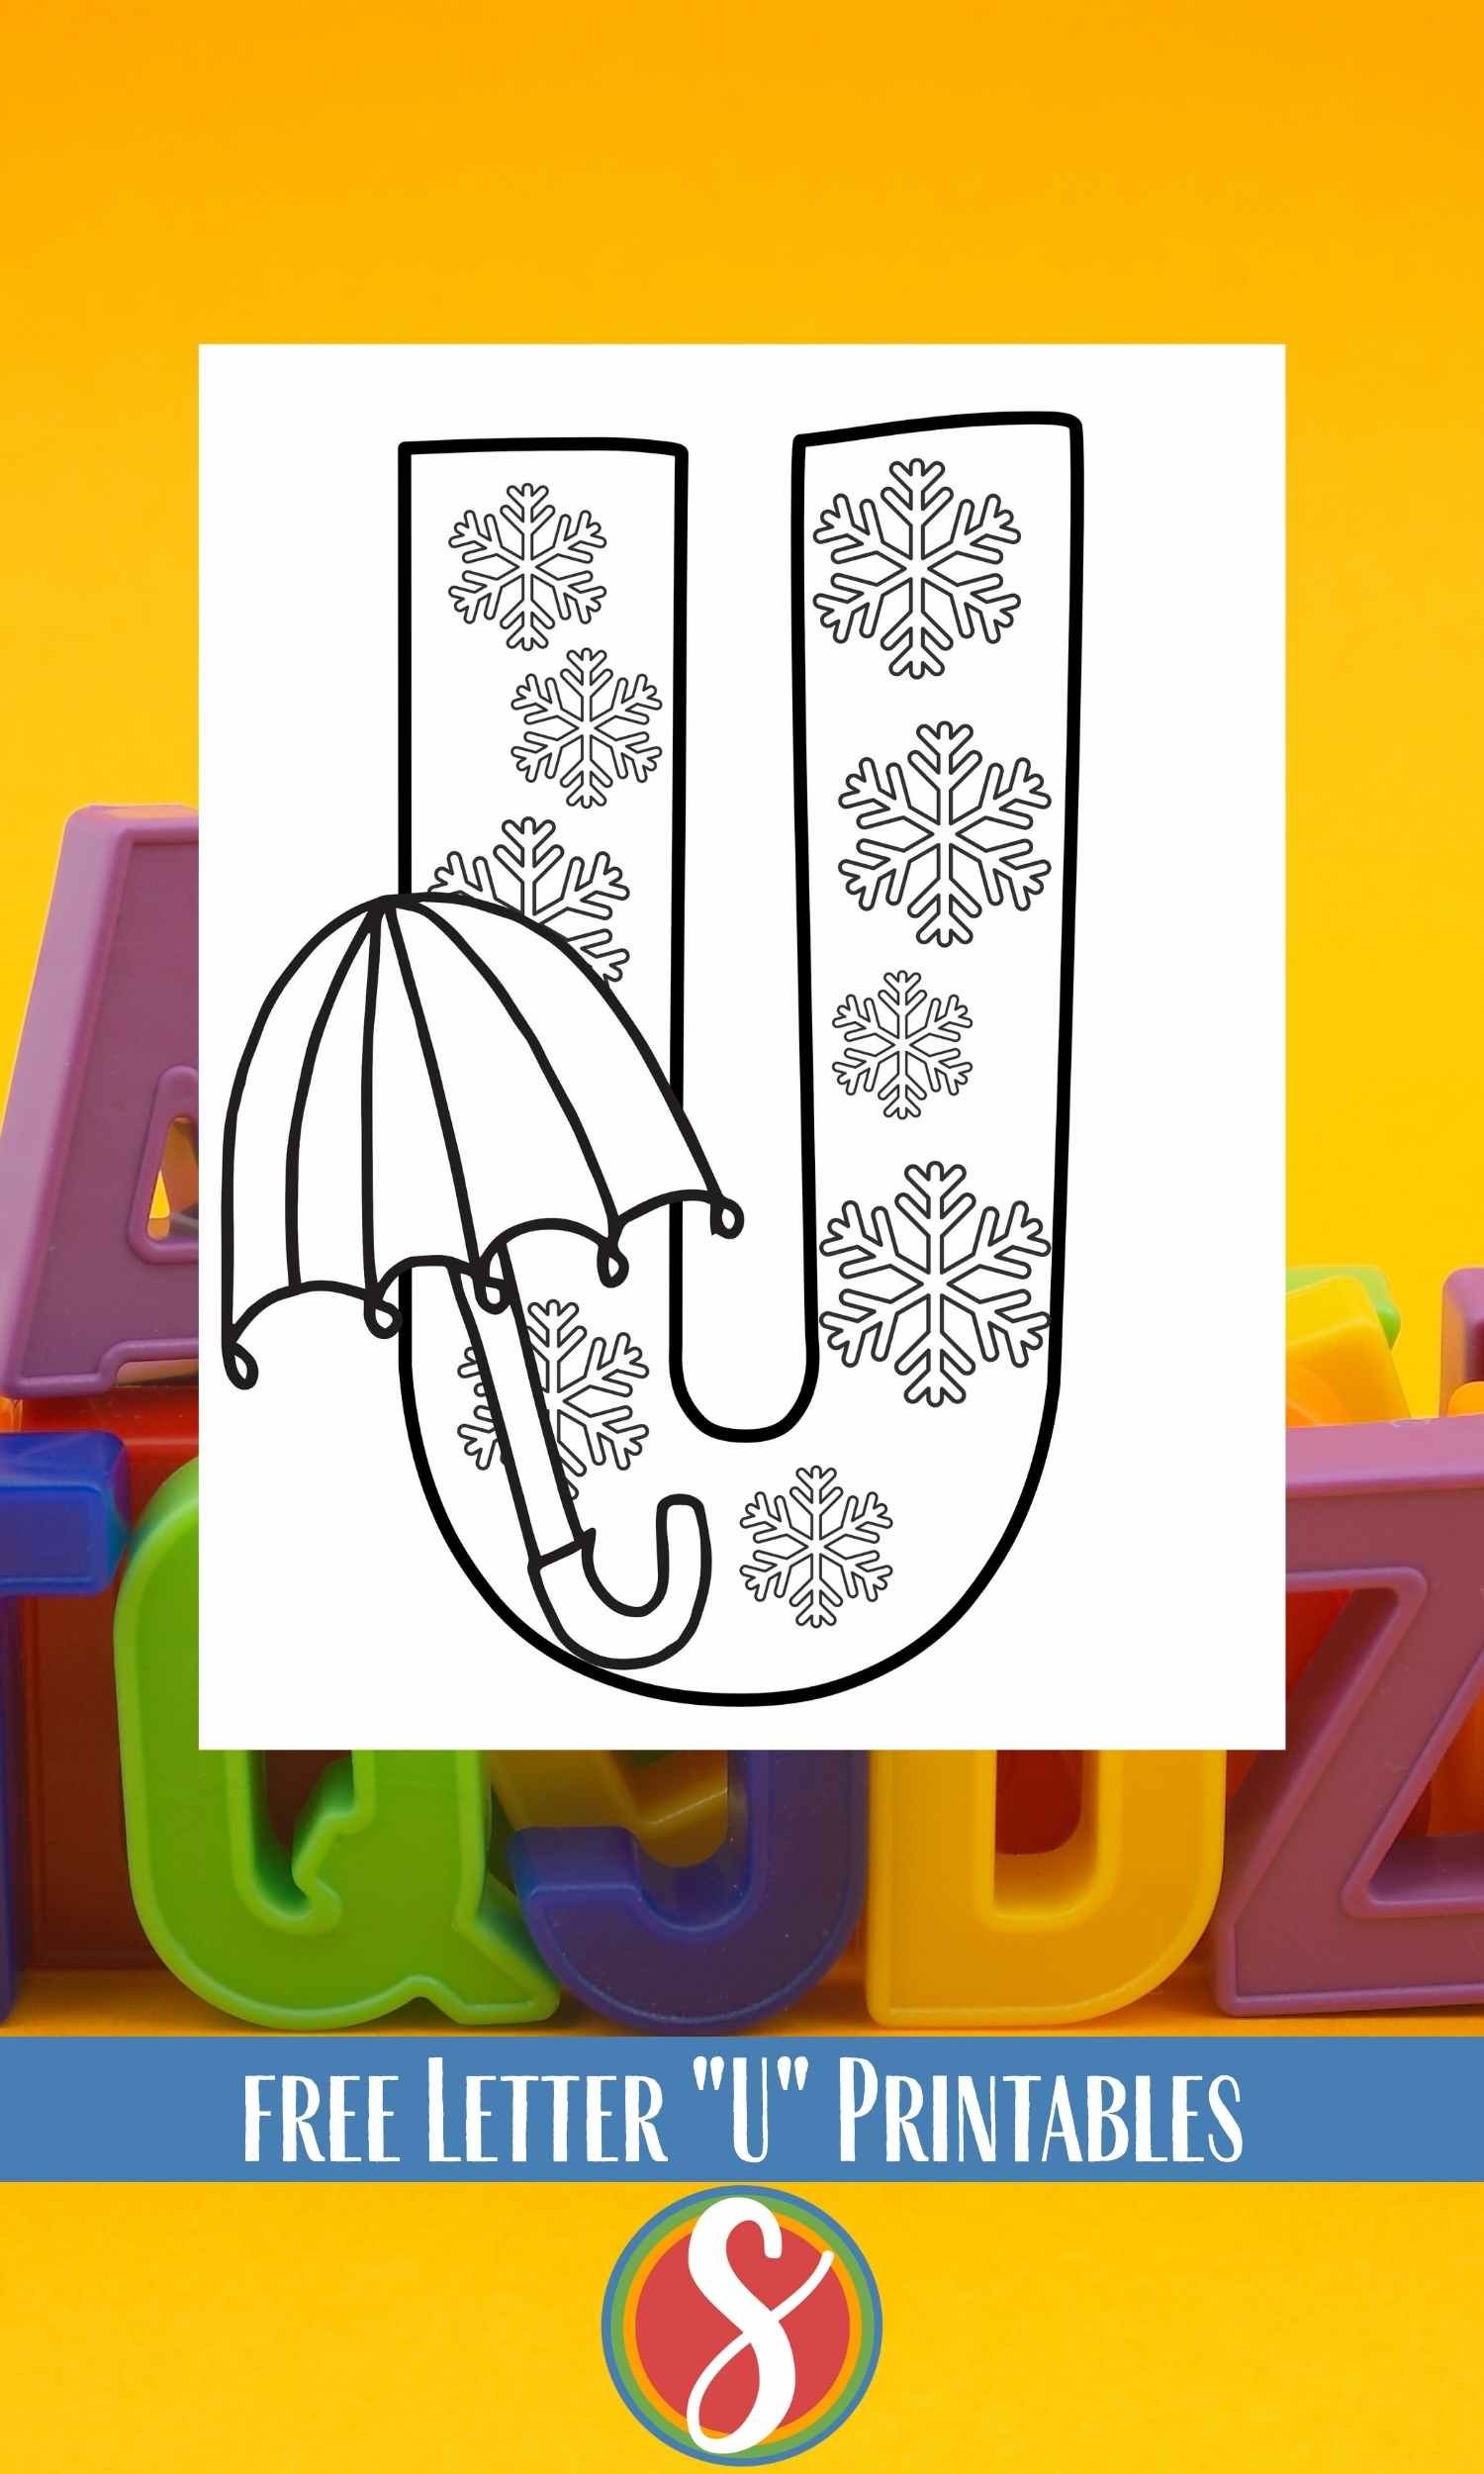 Big bubble letter U with snowflakes inside to color and and umbrella